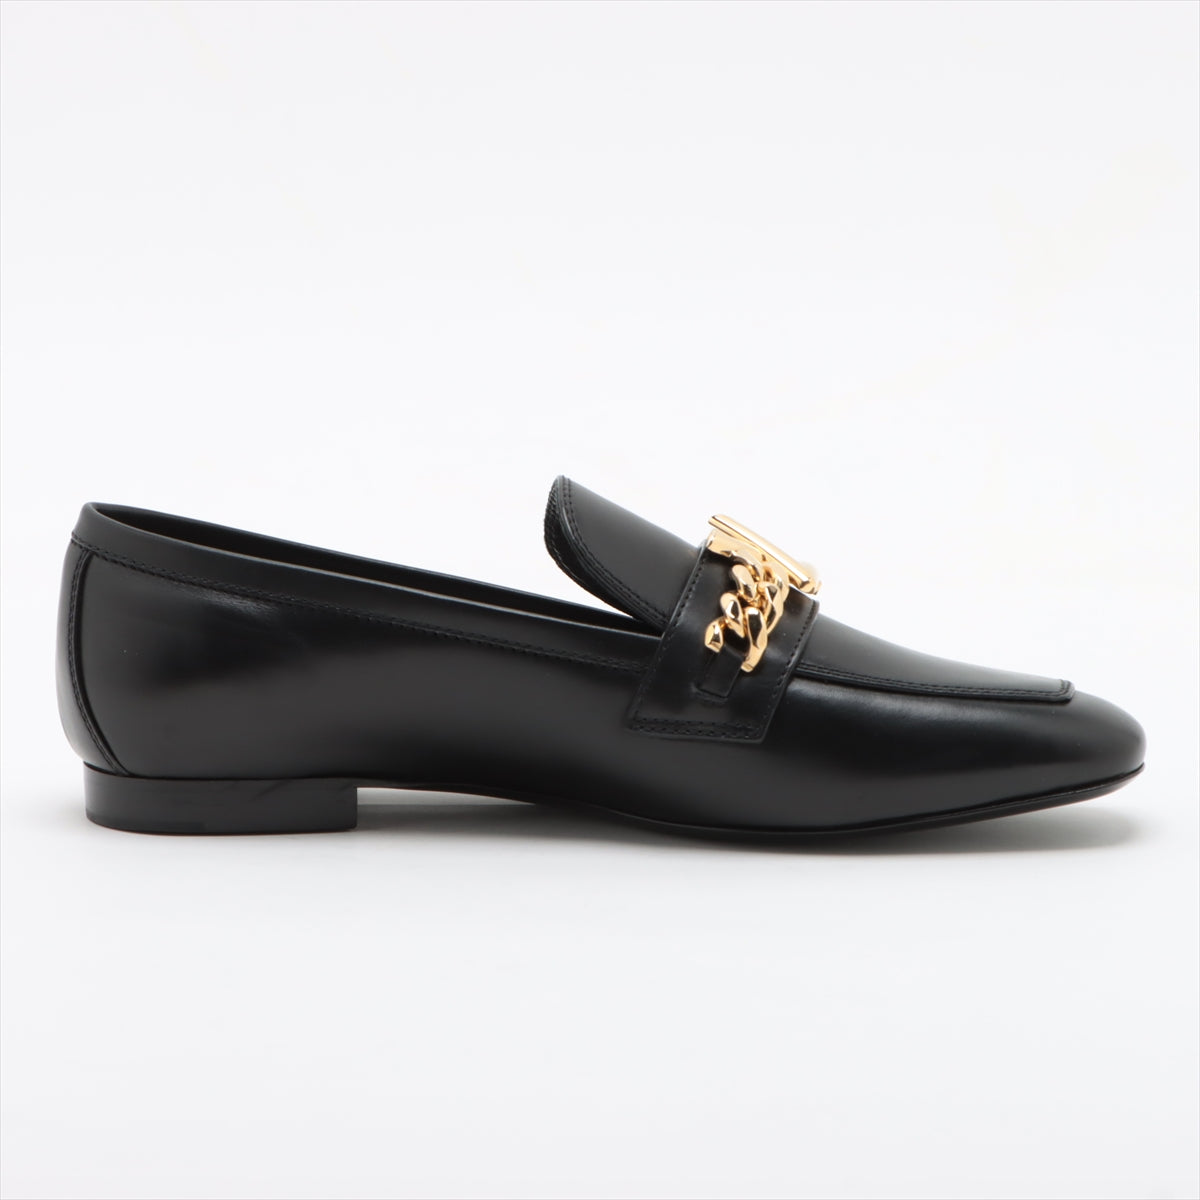 Louis Vuitton Upper case line 18 years Leather Loafer 35 1/2 Ladies' Black SC0178 box There is a bag